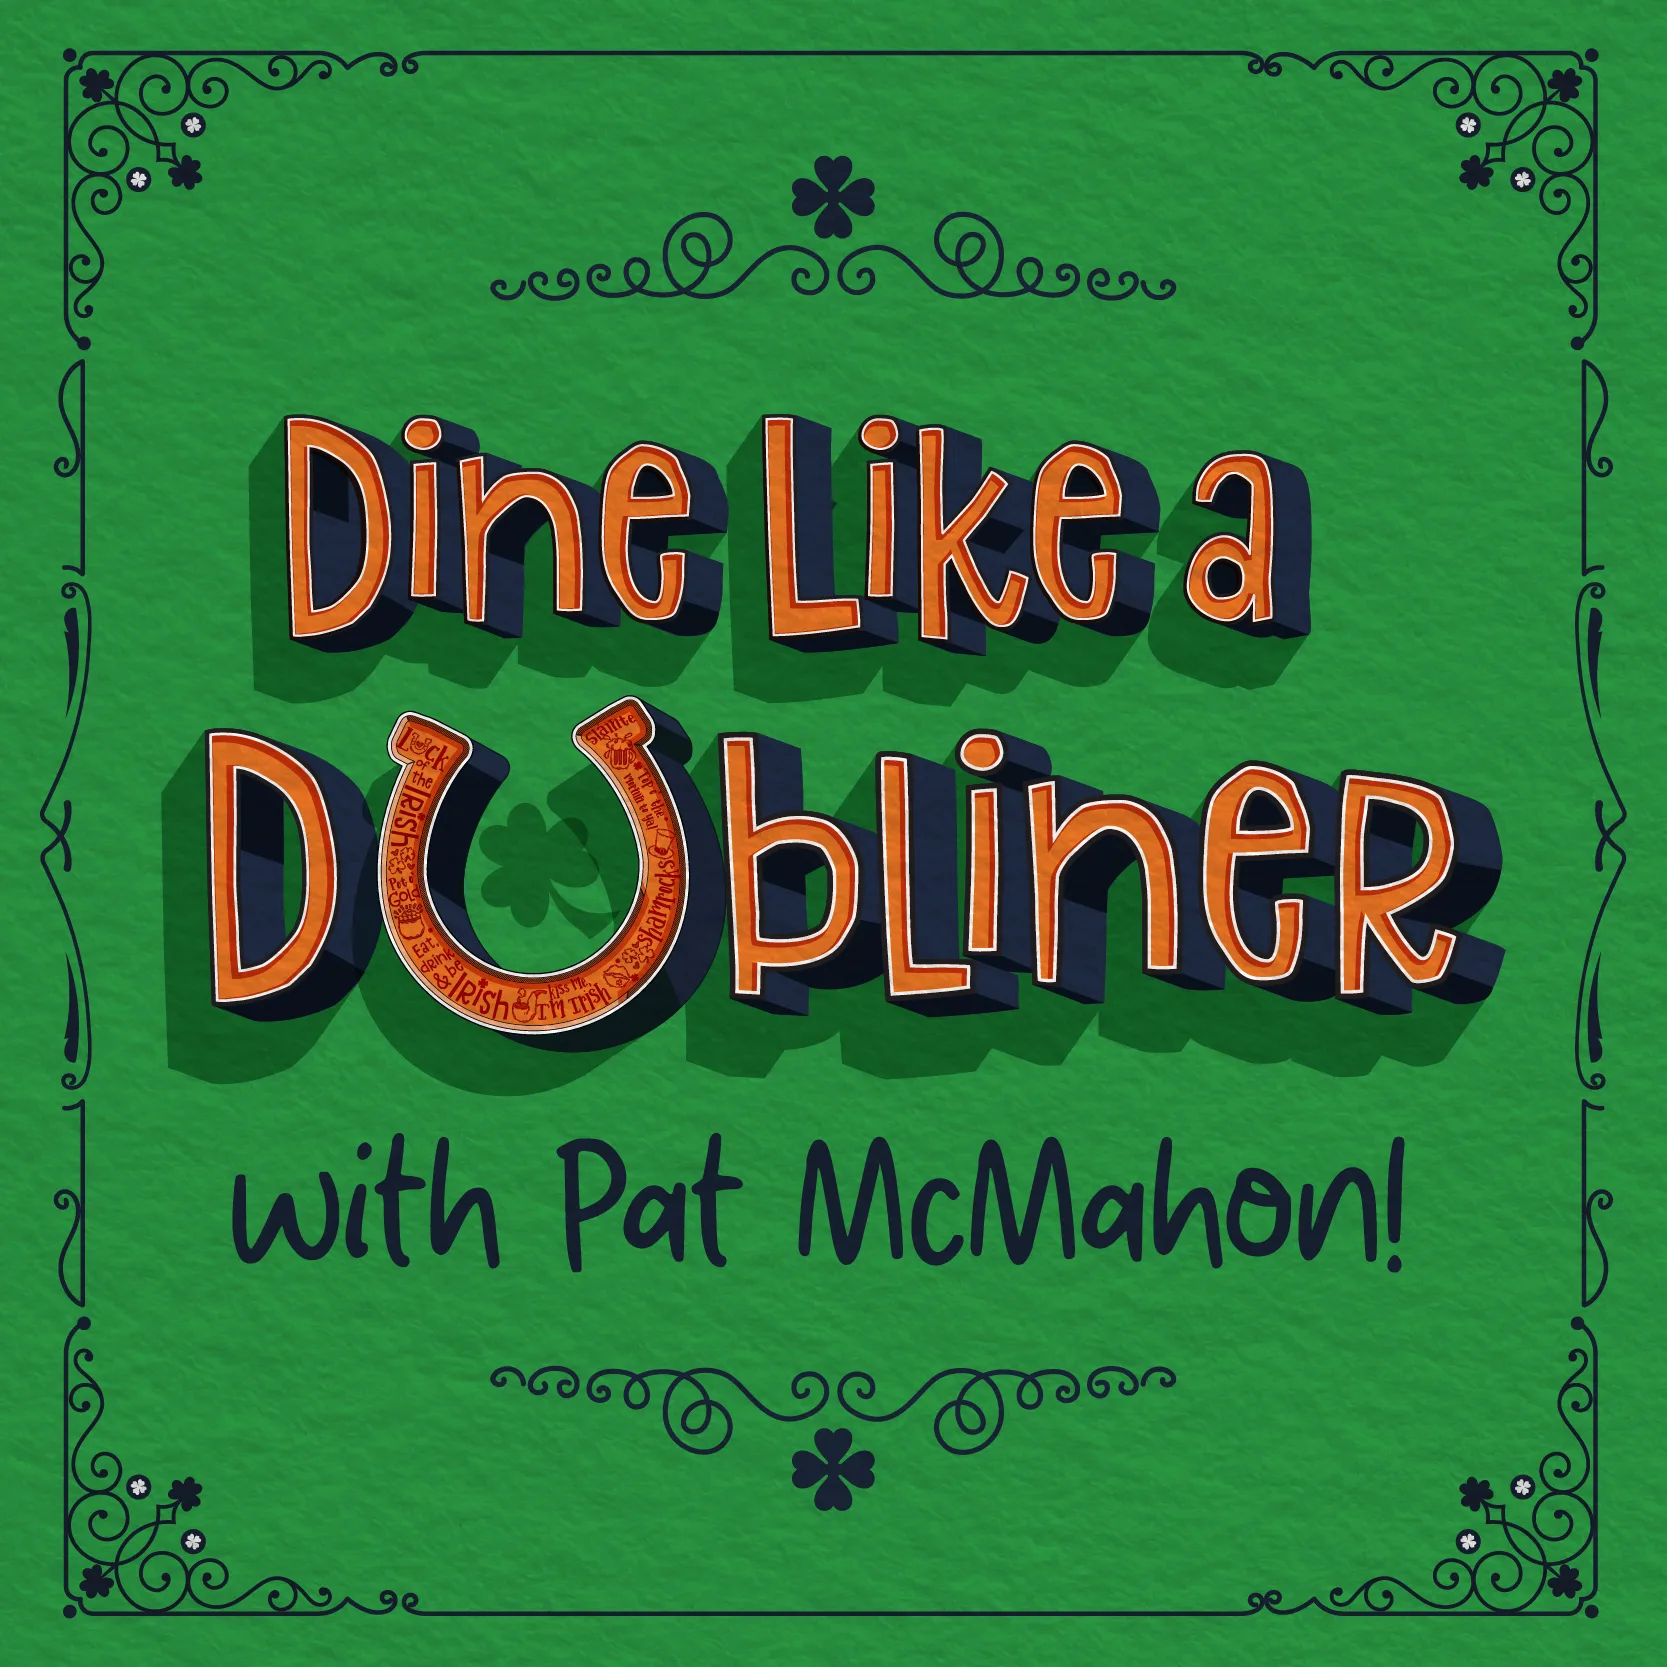 St Patrick's Day dinner graphic